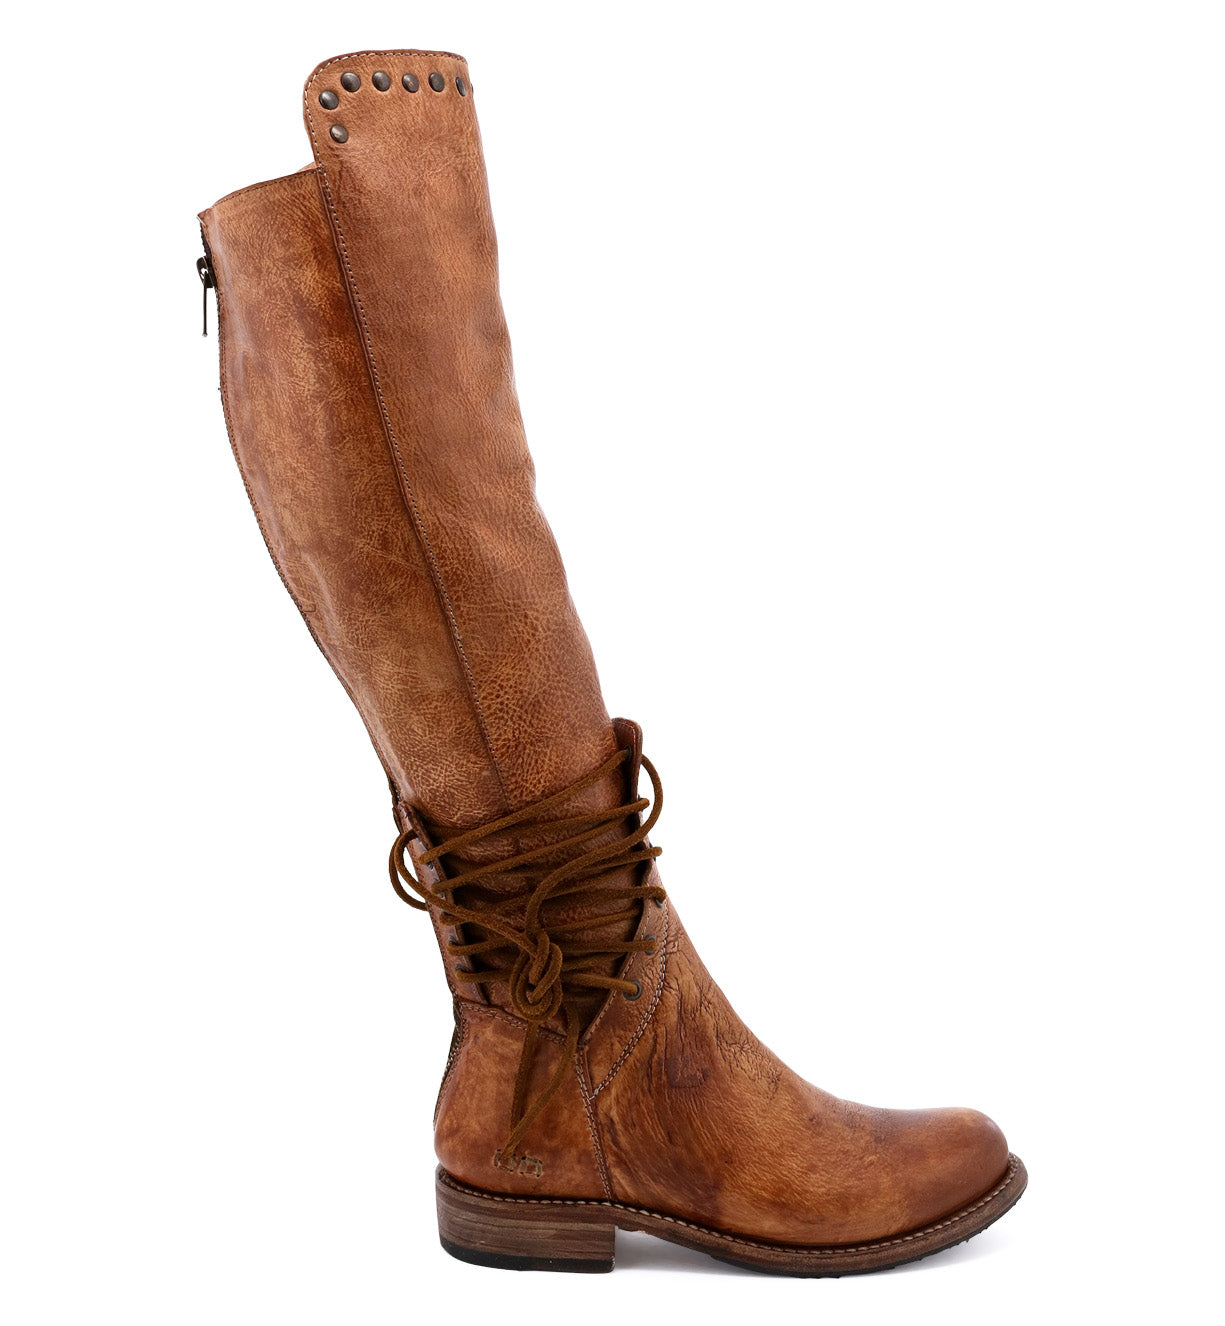 A women's Loxley brown leather boot with laces, from the brand Bed Stu.